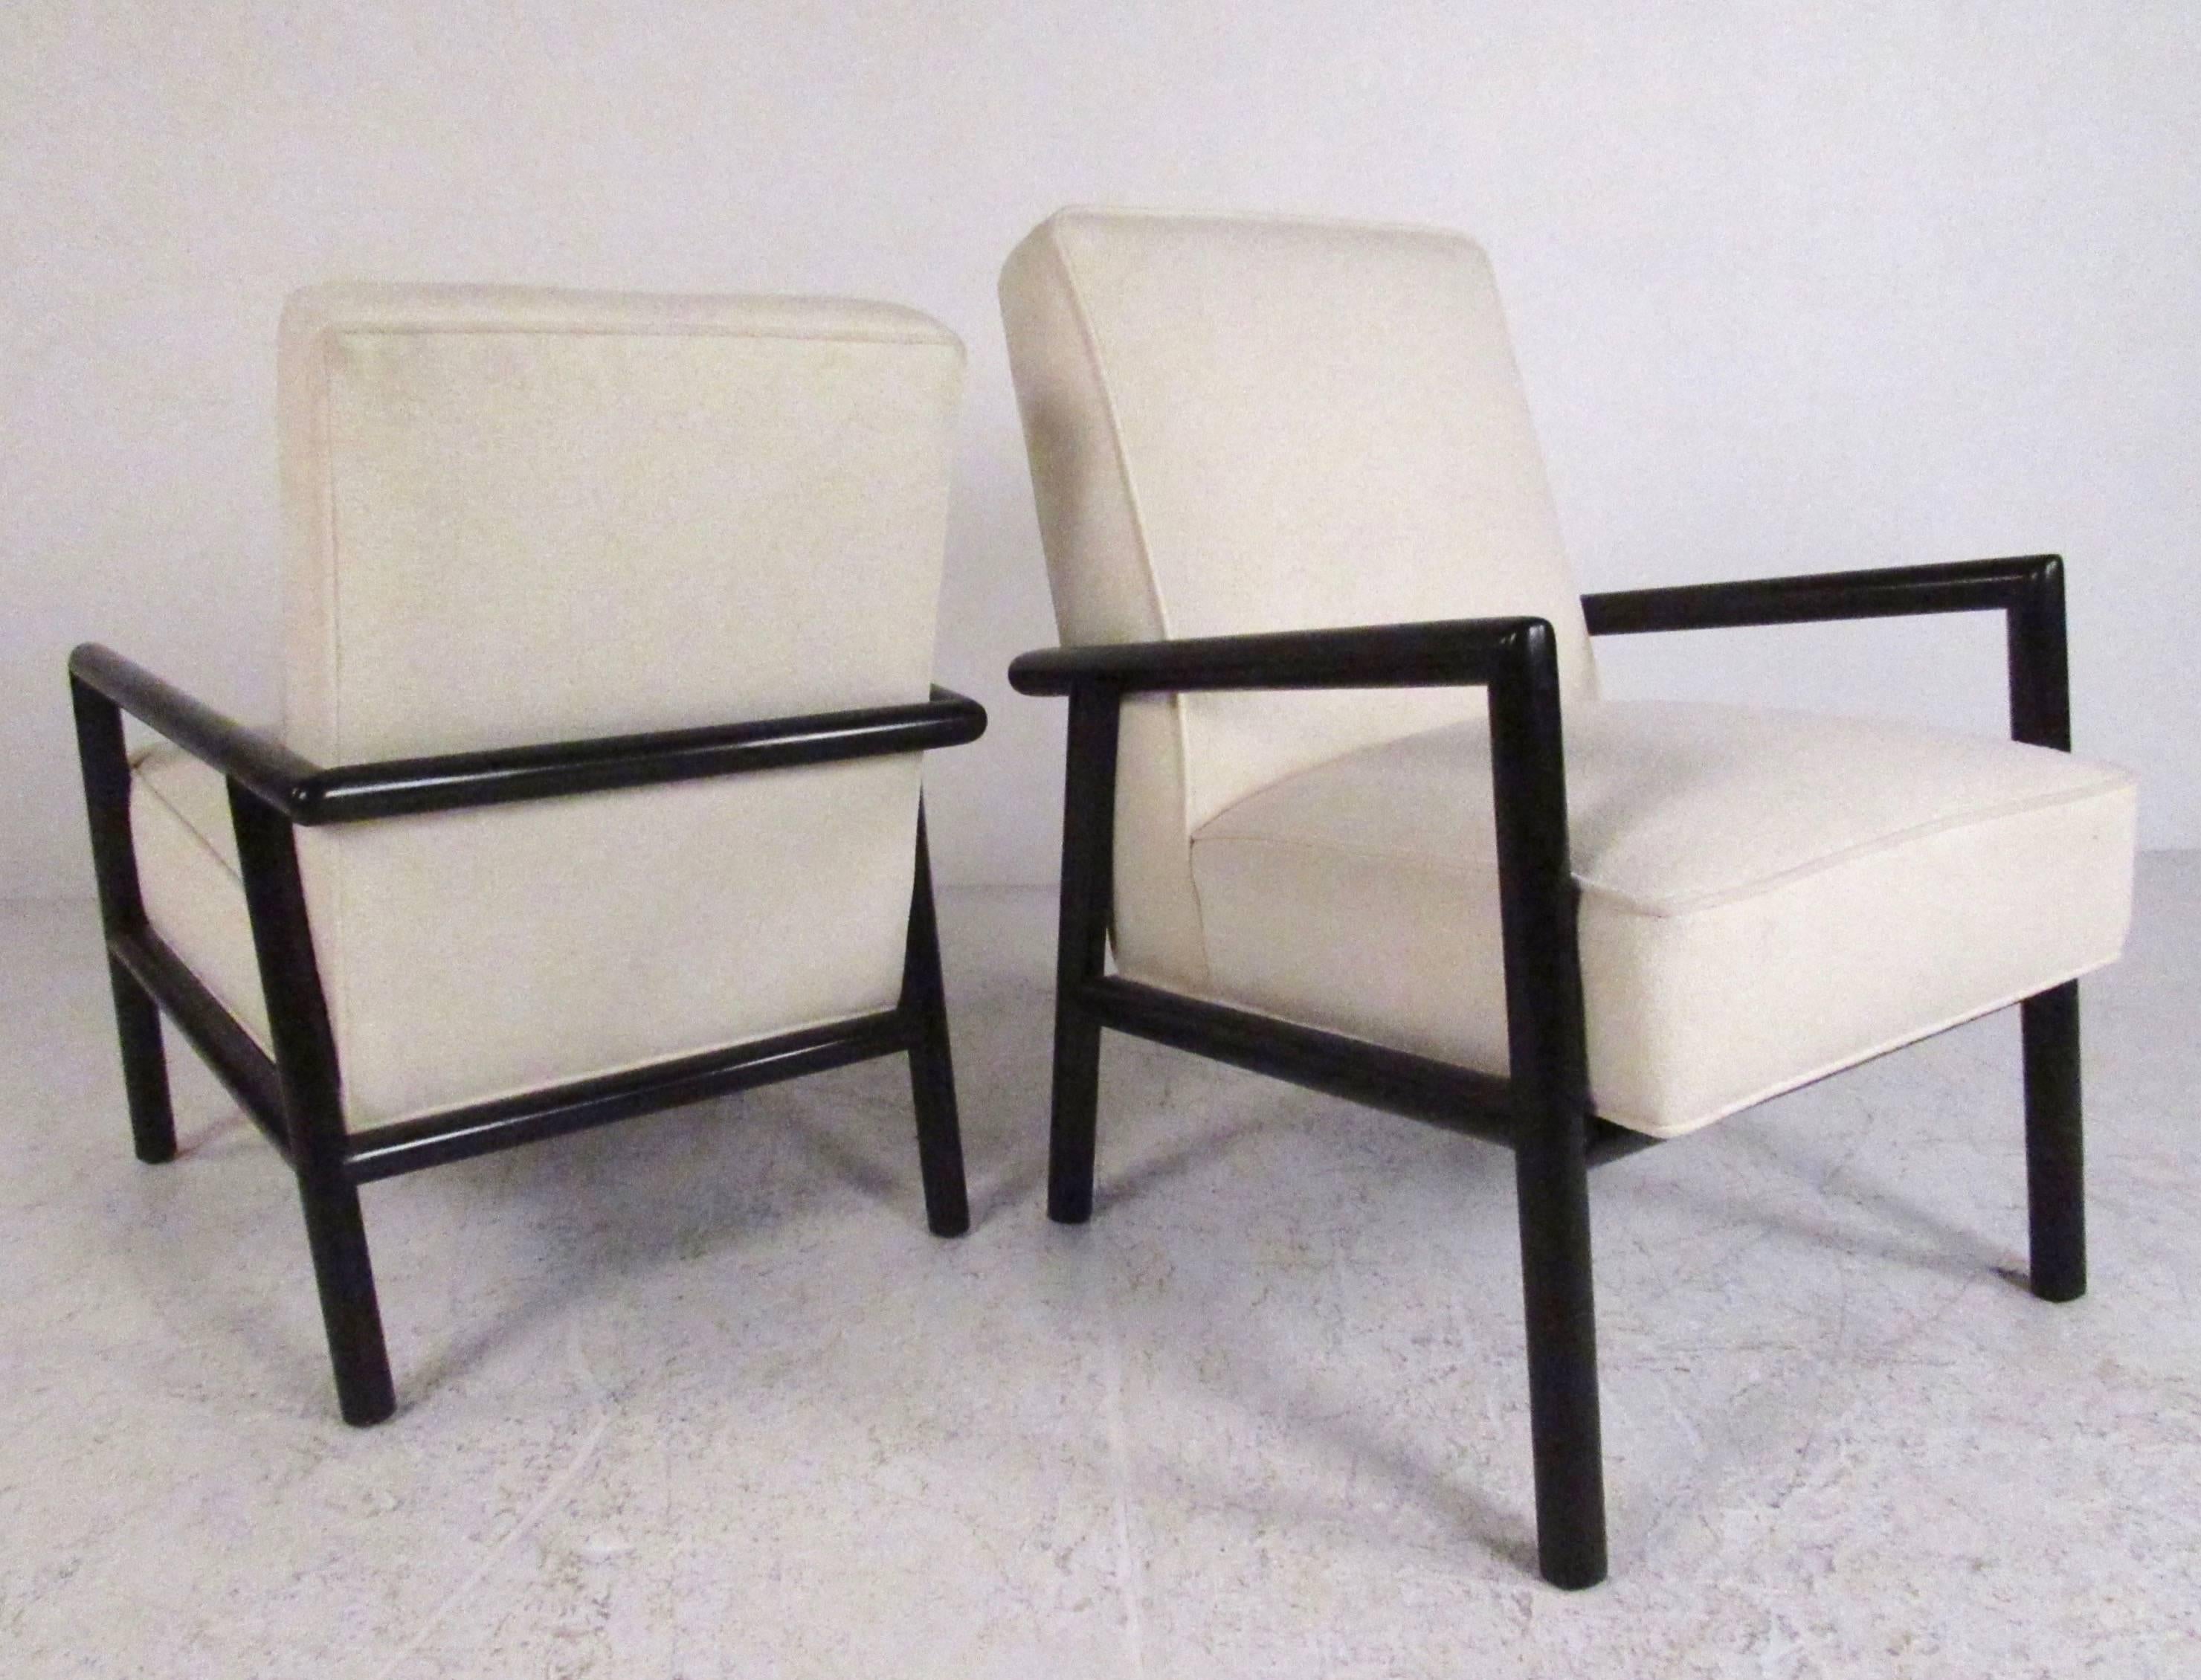 This unique pair of his and hers chairs feature upholstered seats with simple yet shapely black lacquer frames. Exquisite modern design by T.H. Robsjohn-Gibbings makes a striking impression in any seating arrangement for home or office. Differing